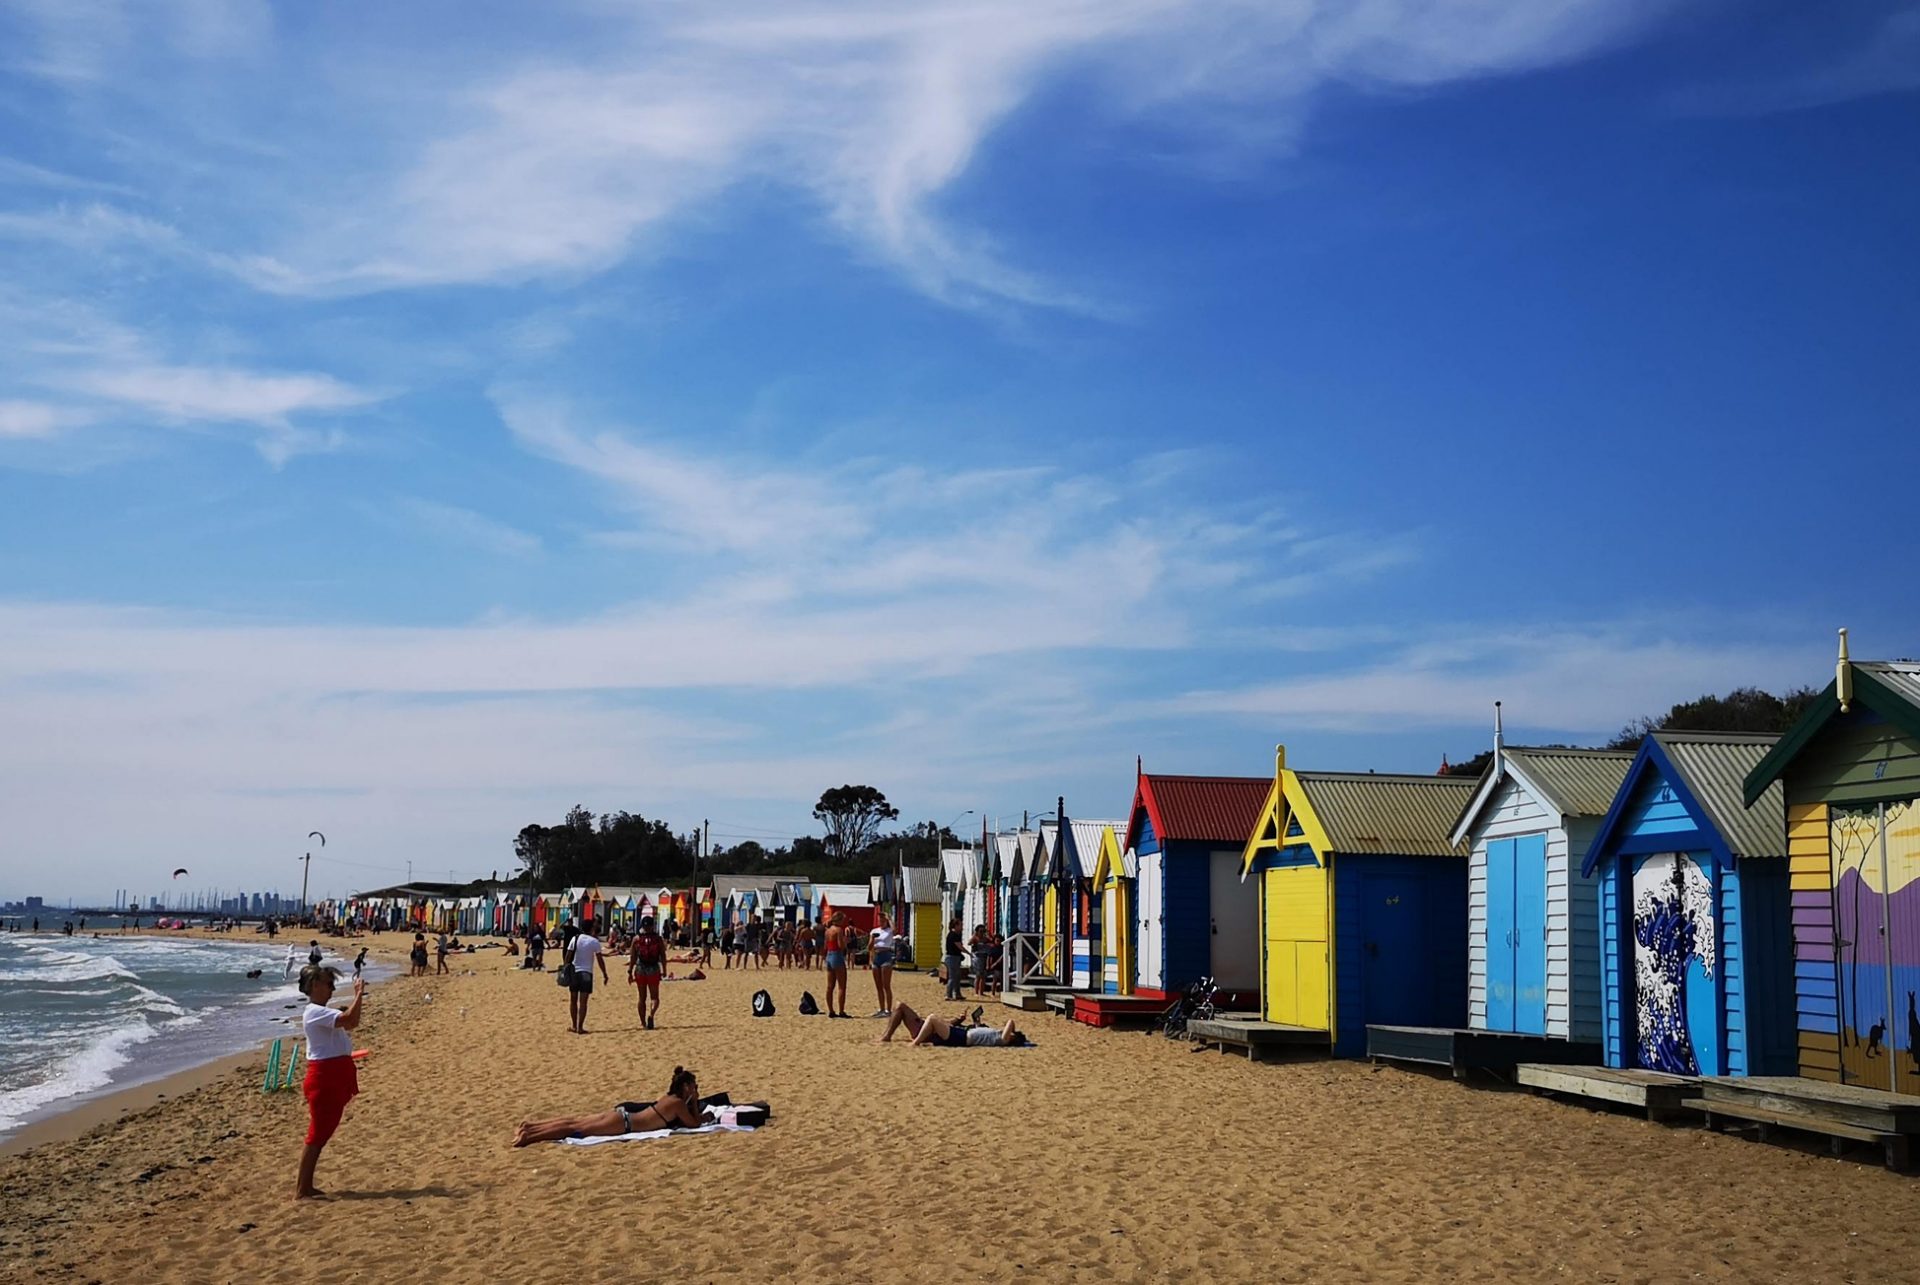 The picture shows colourful houses at a beach in Melbourne.